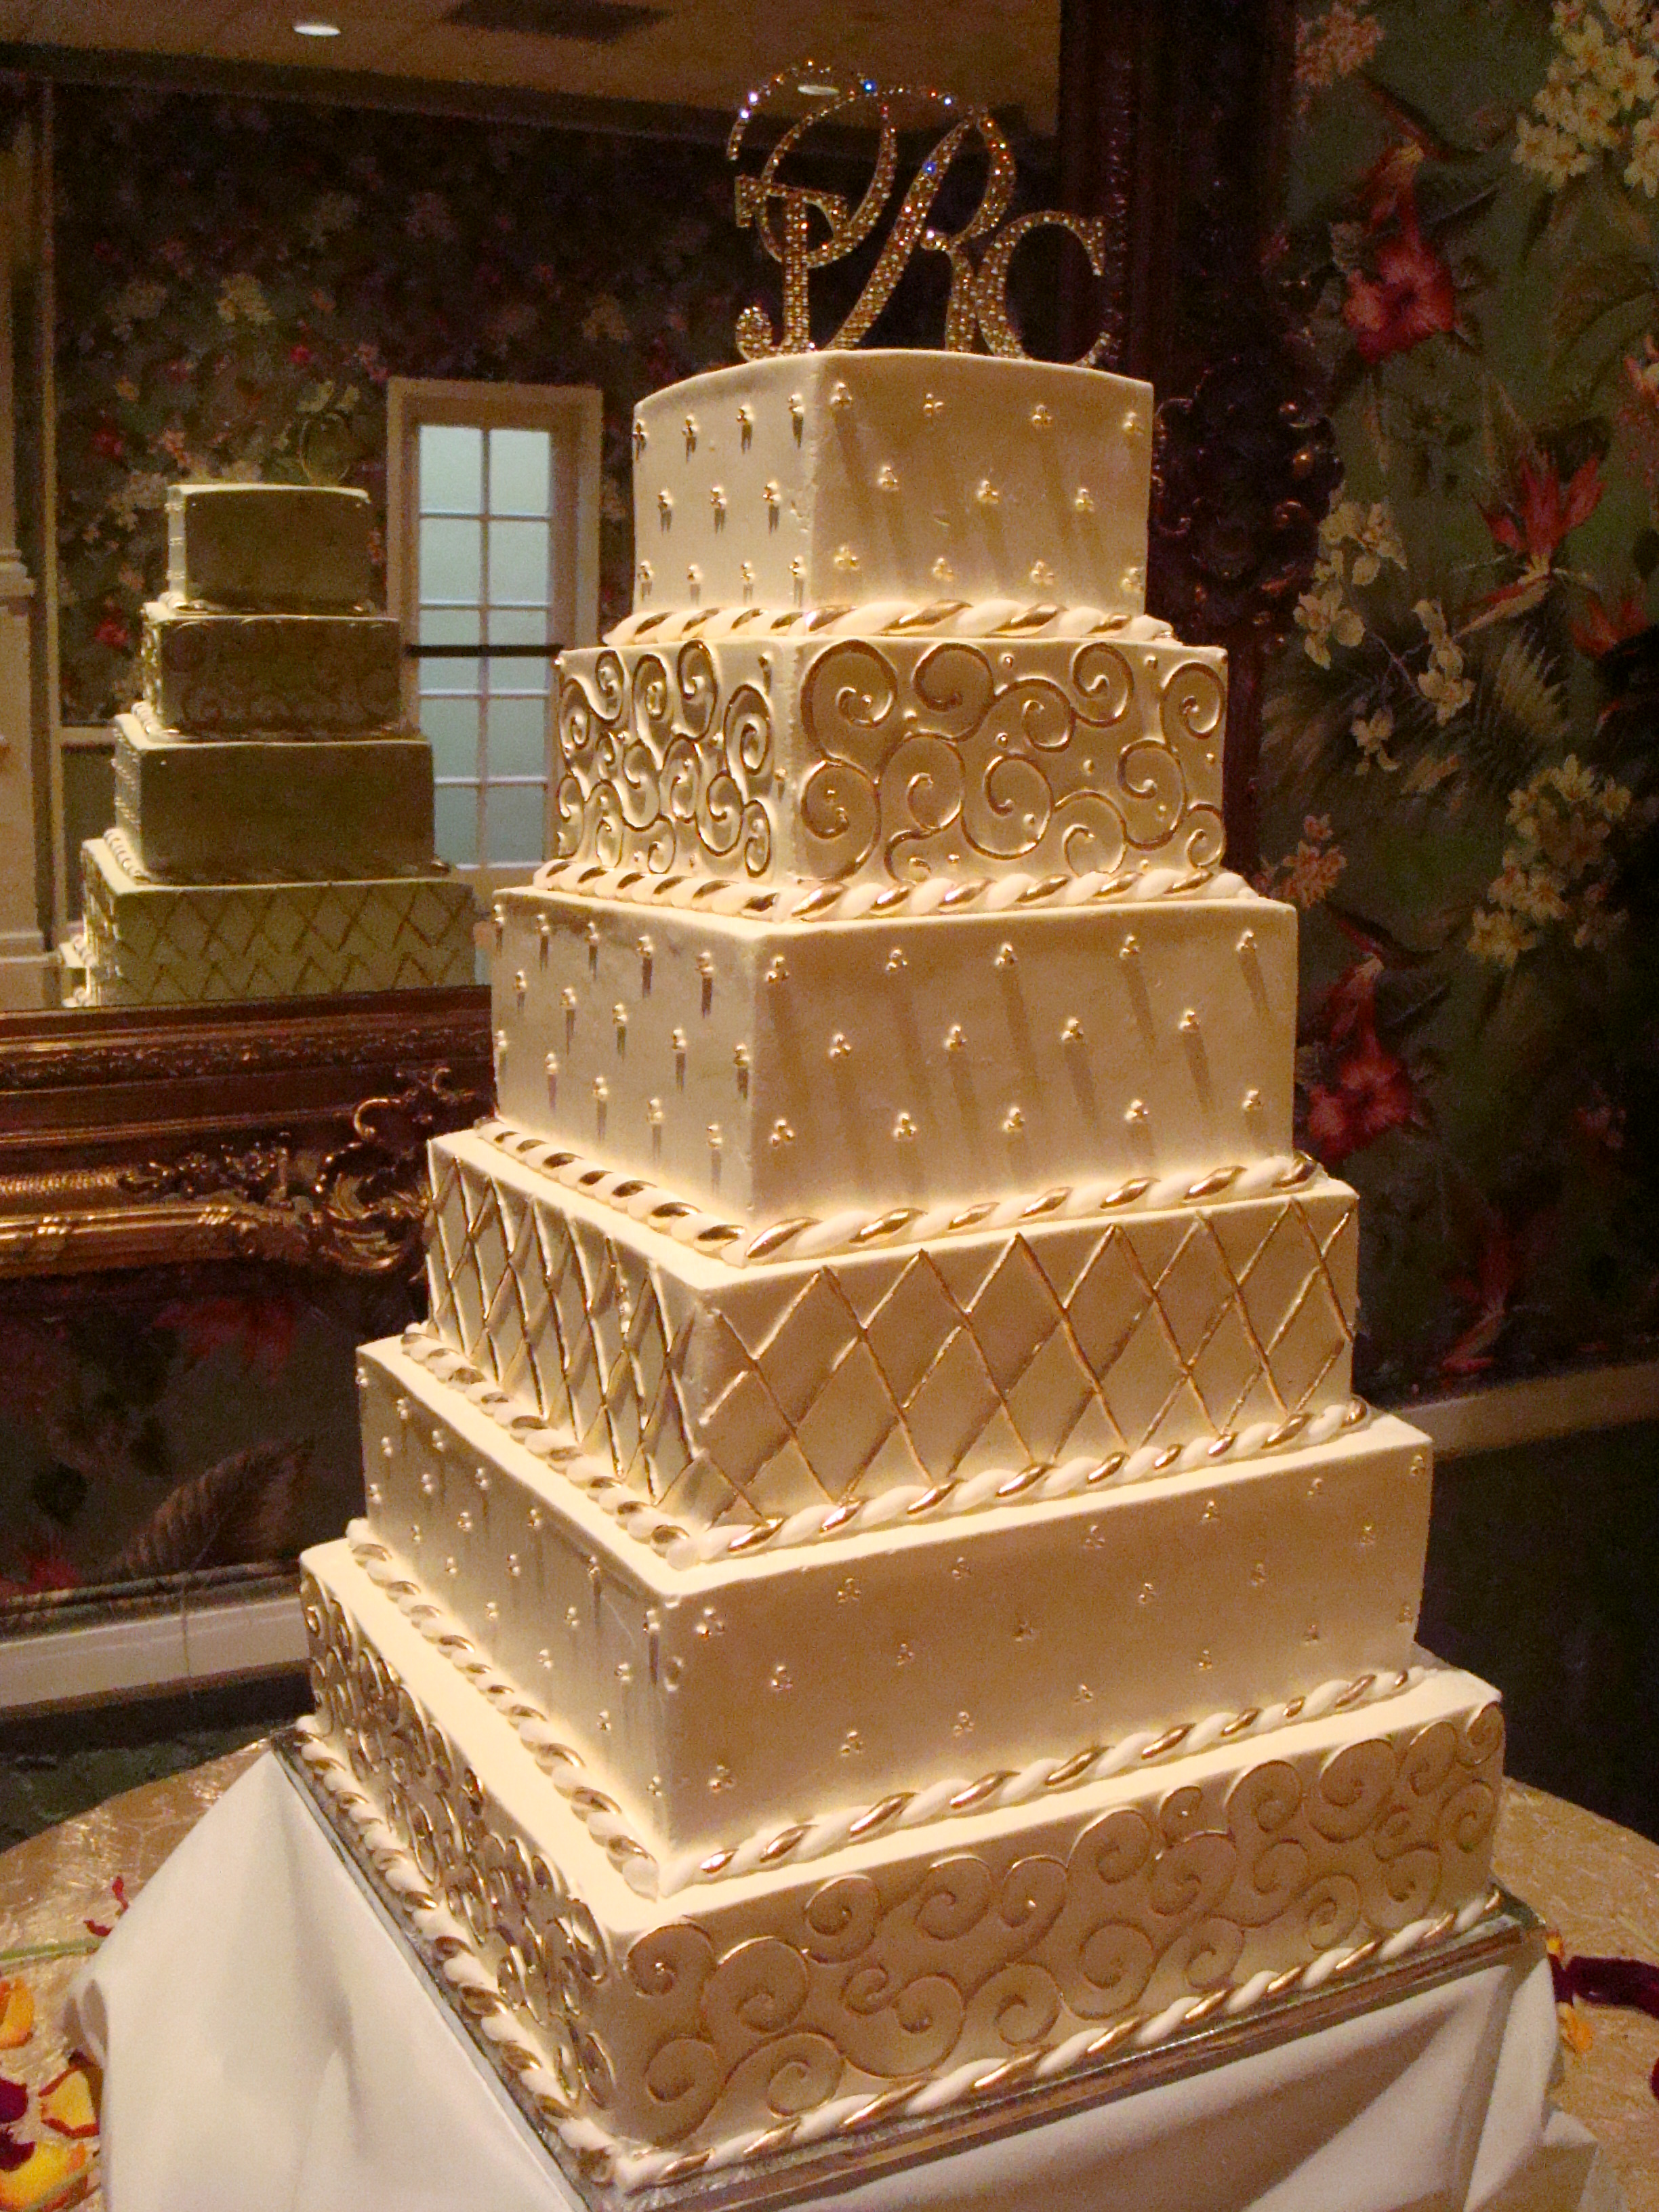 11 winter wedding cakes that are worth going out in the cold to find